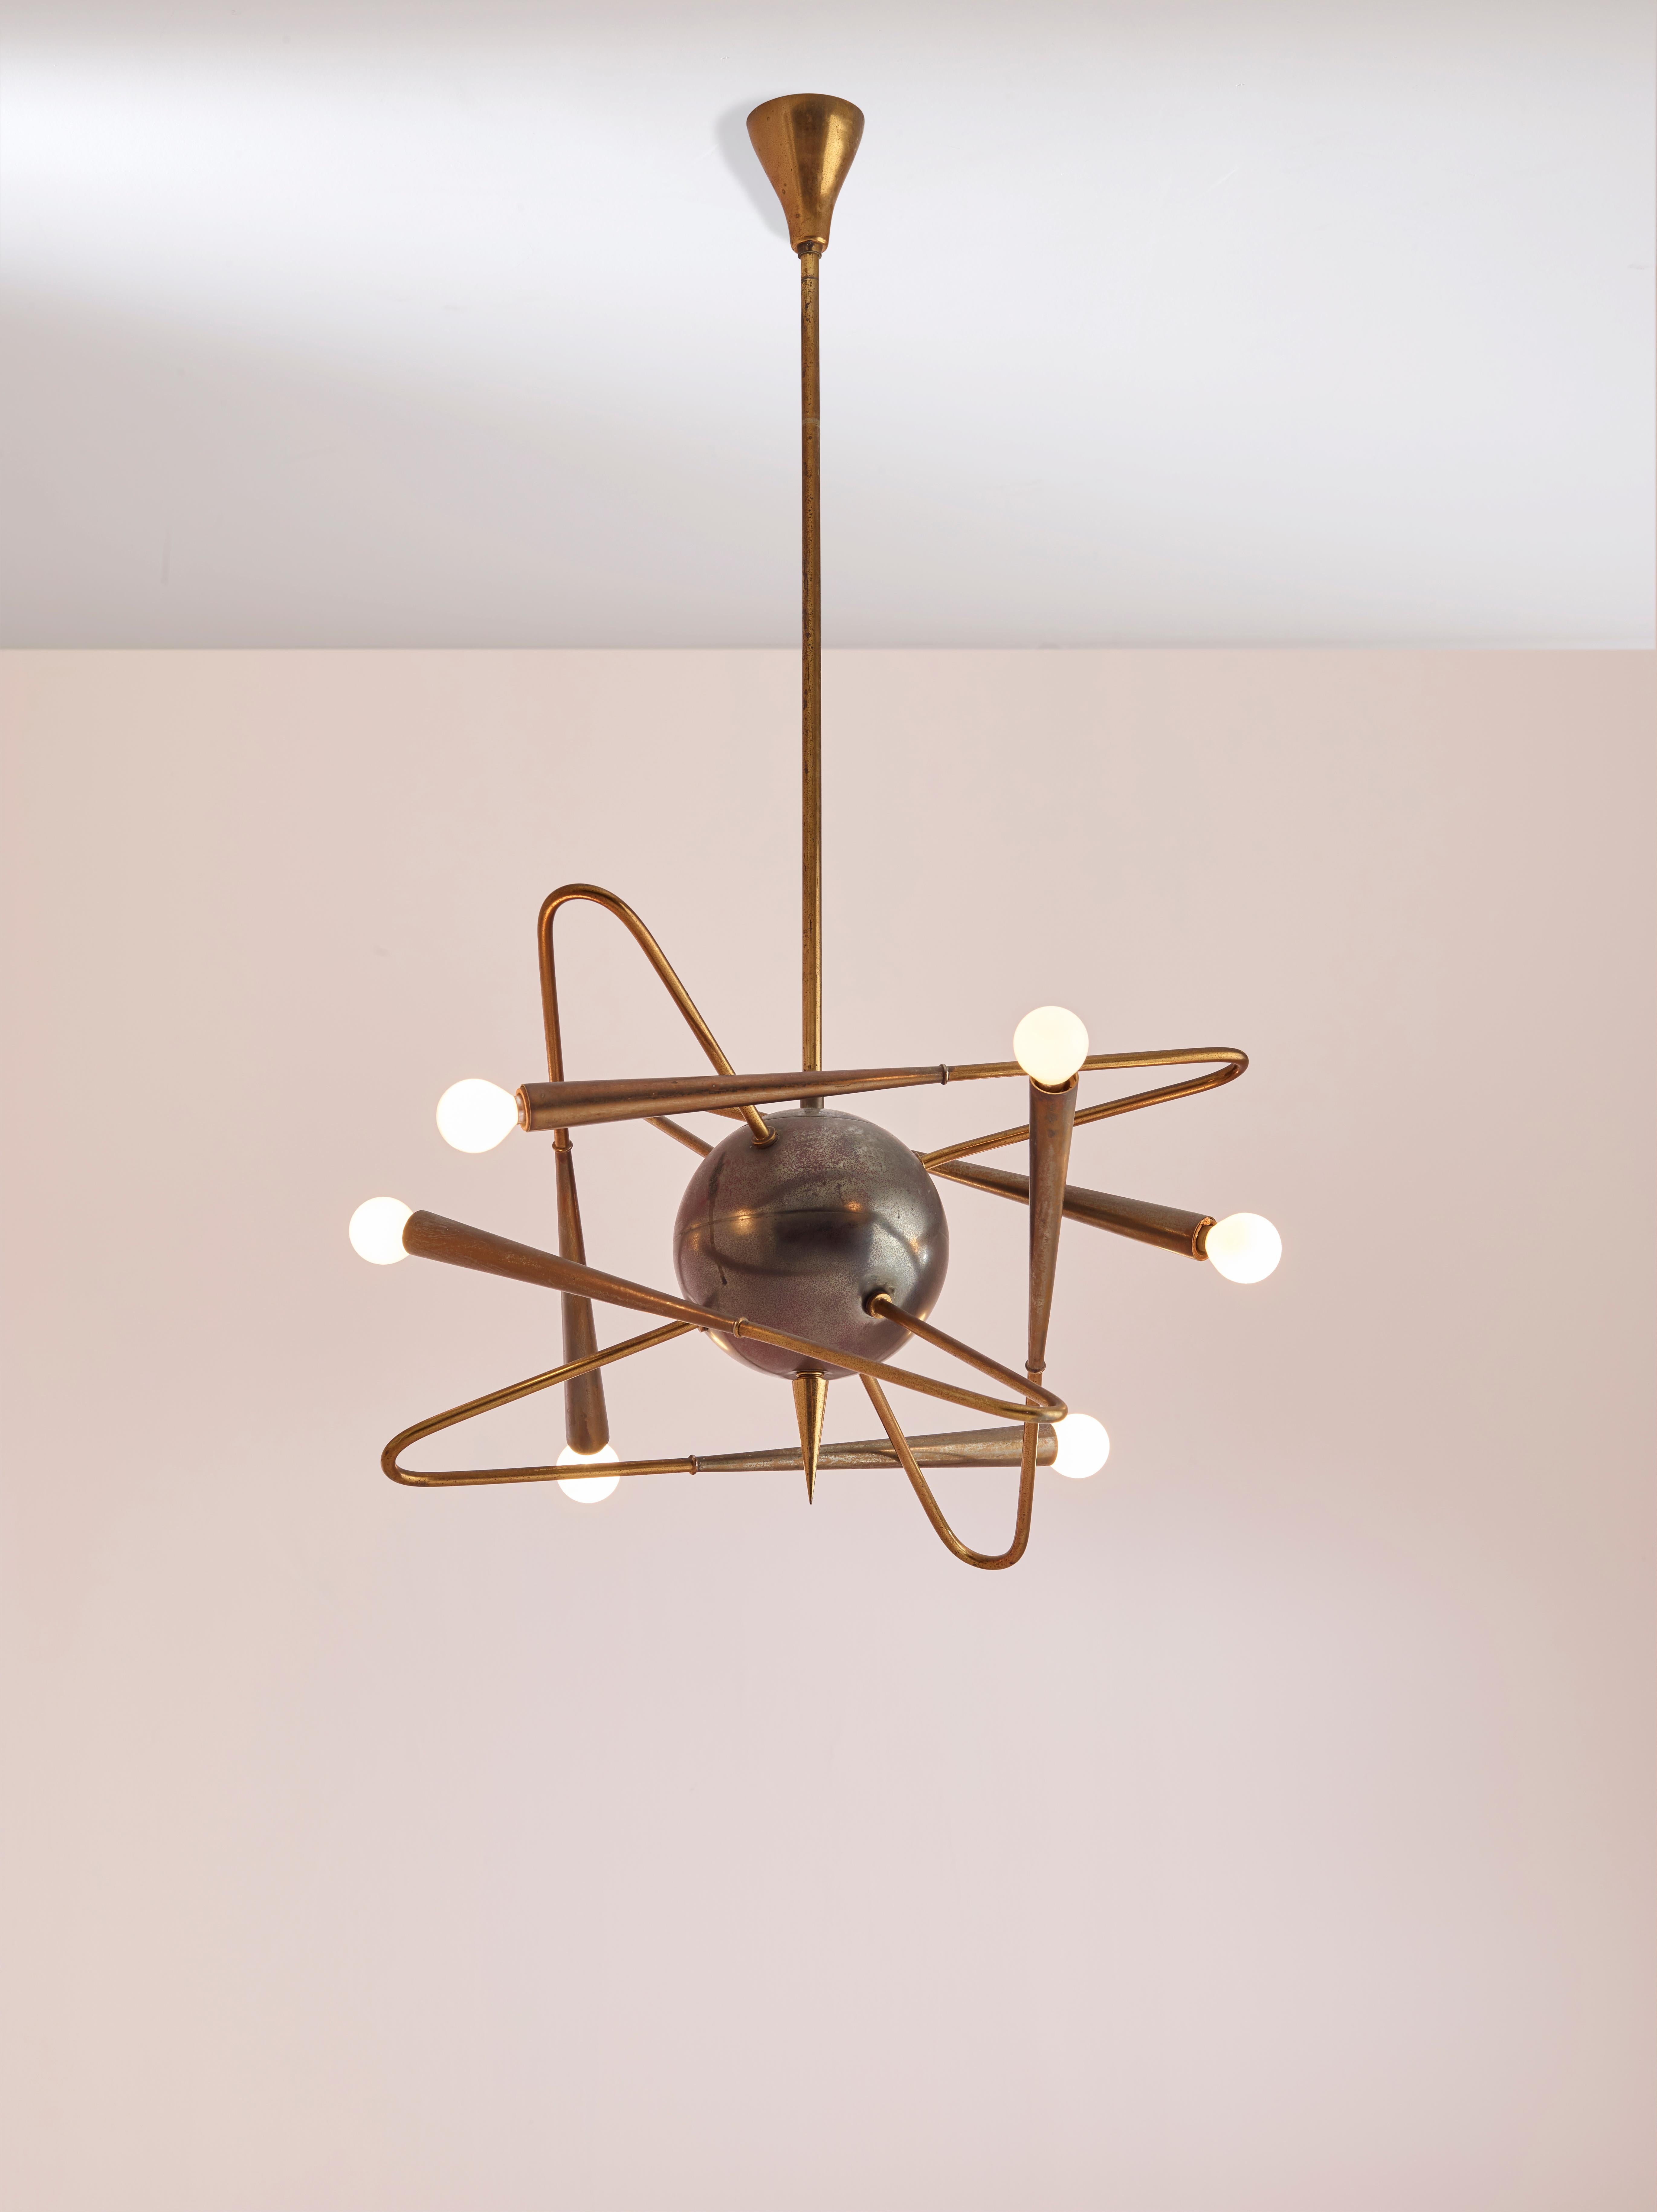 A rare Stilnovo sputnik chandelier manufactured in Italy during the 1950s.

It features a central burnished brass sphere held by a rigid brass rod and six curved arms which recall to a satellite shape giv to the chandelier a beautiful and elegant